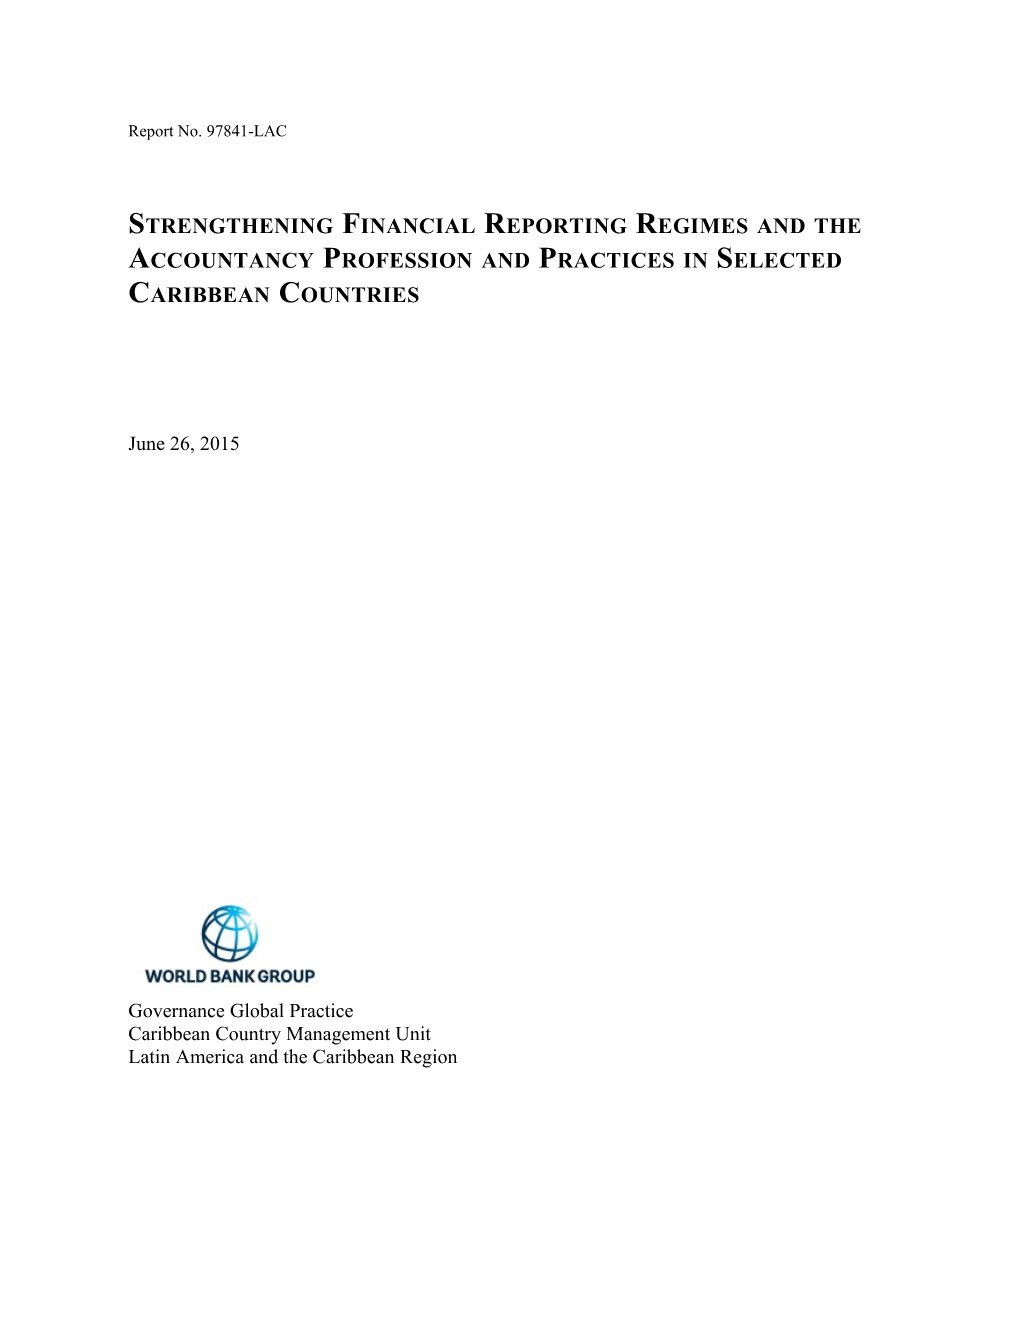 Strengthening Financial Reporting Regimes and the Accountancy Profession and Practices